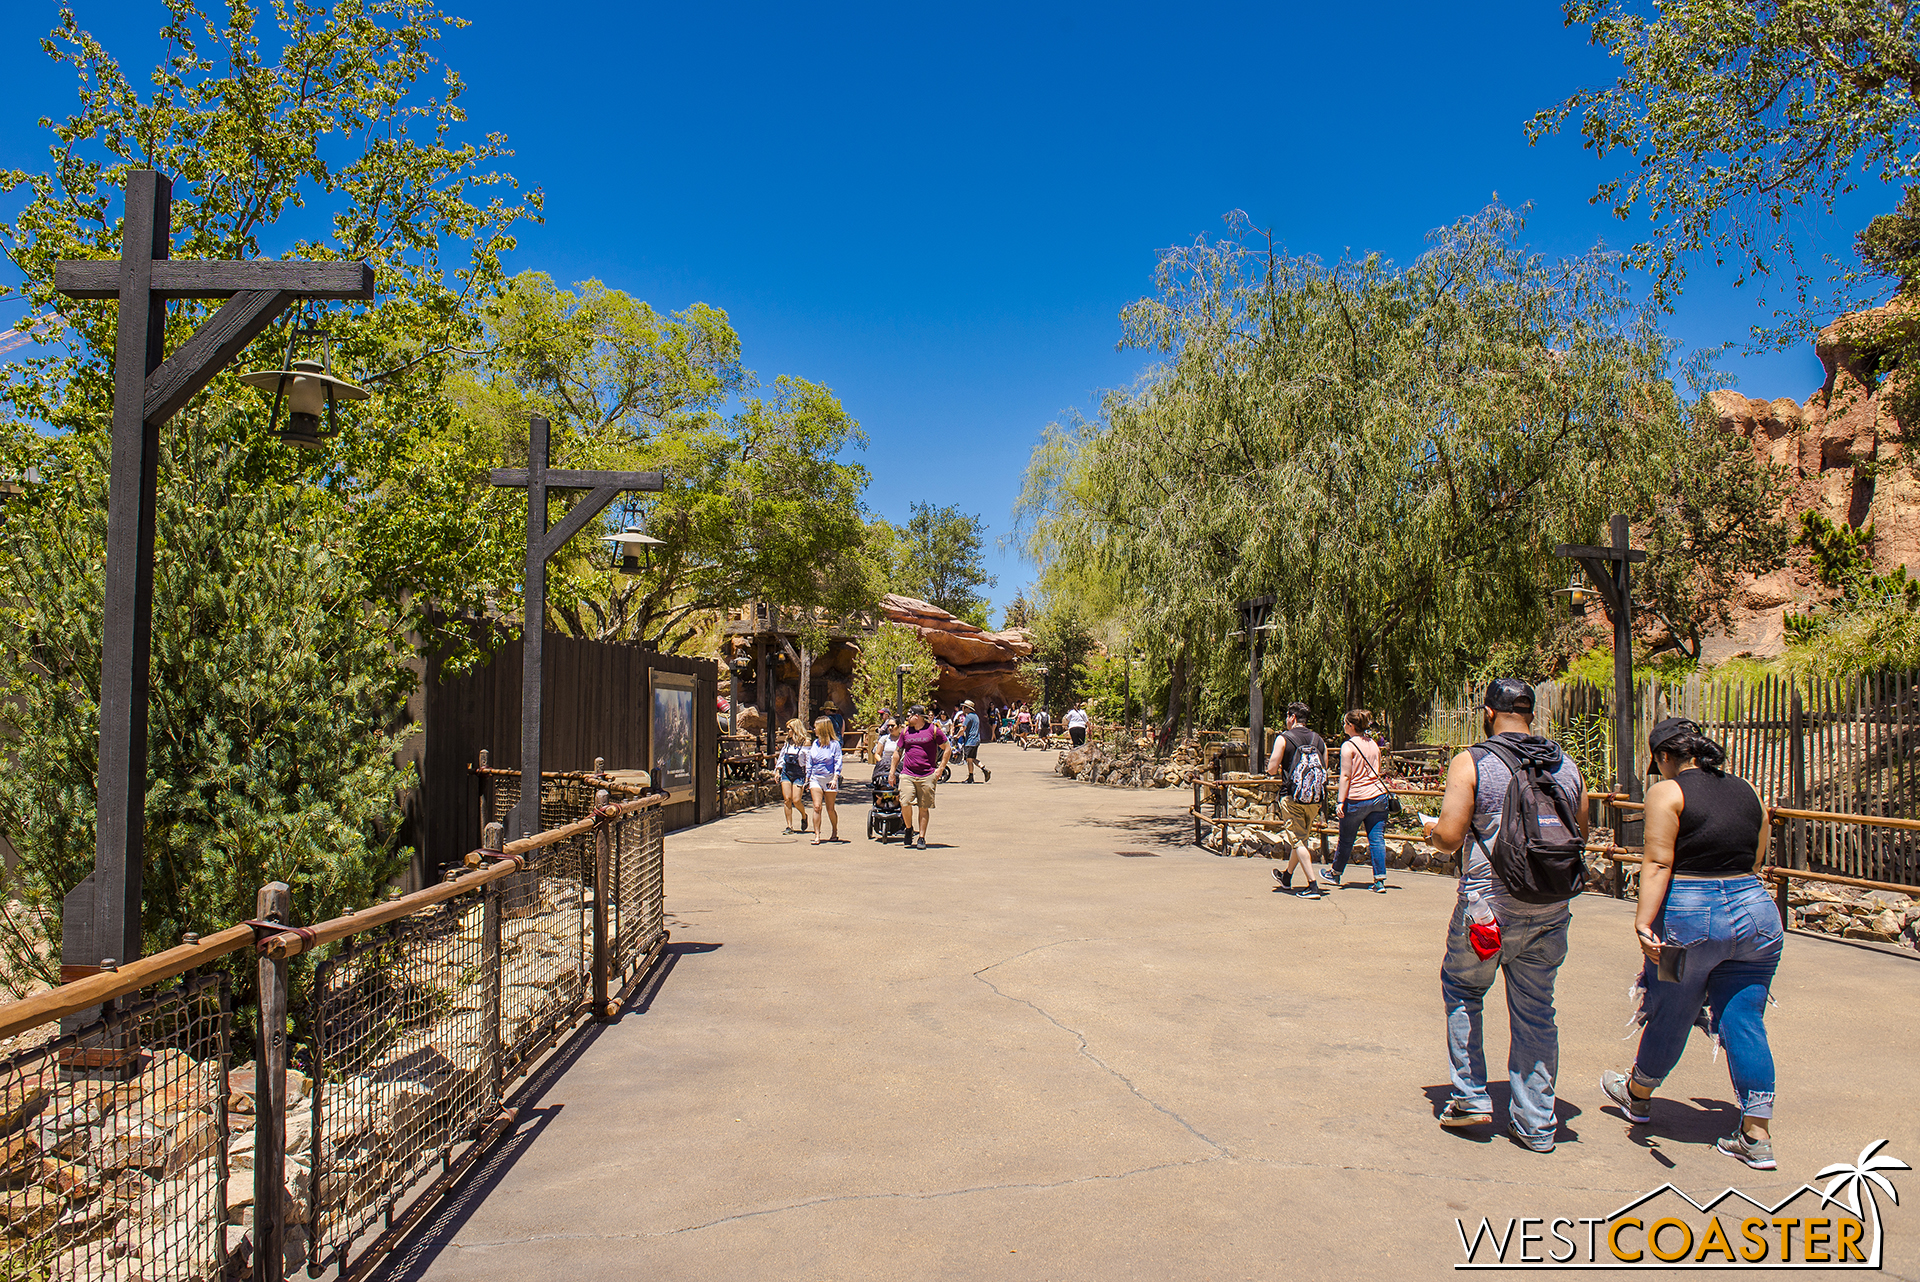  The new area looks great!&nbsp; Very fitting with the Big Thunder Mountain aesthetic! 